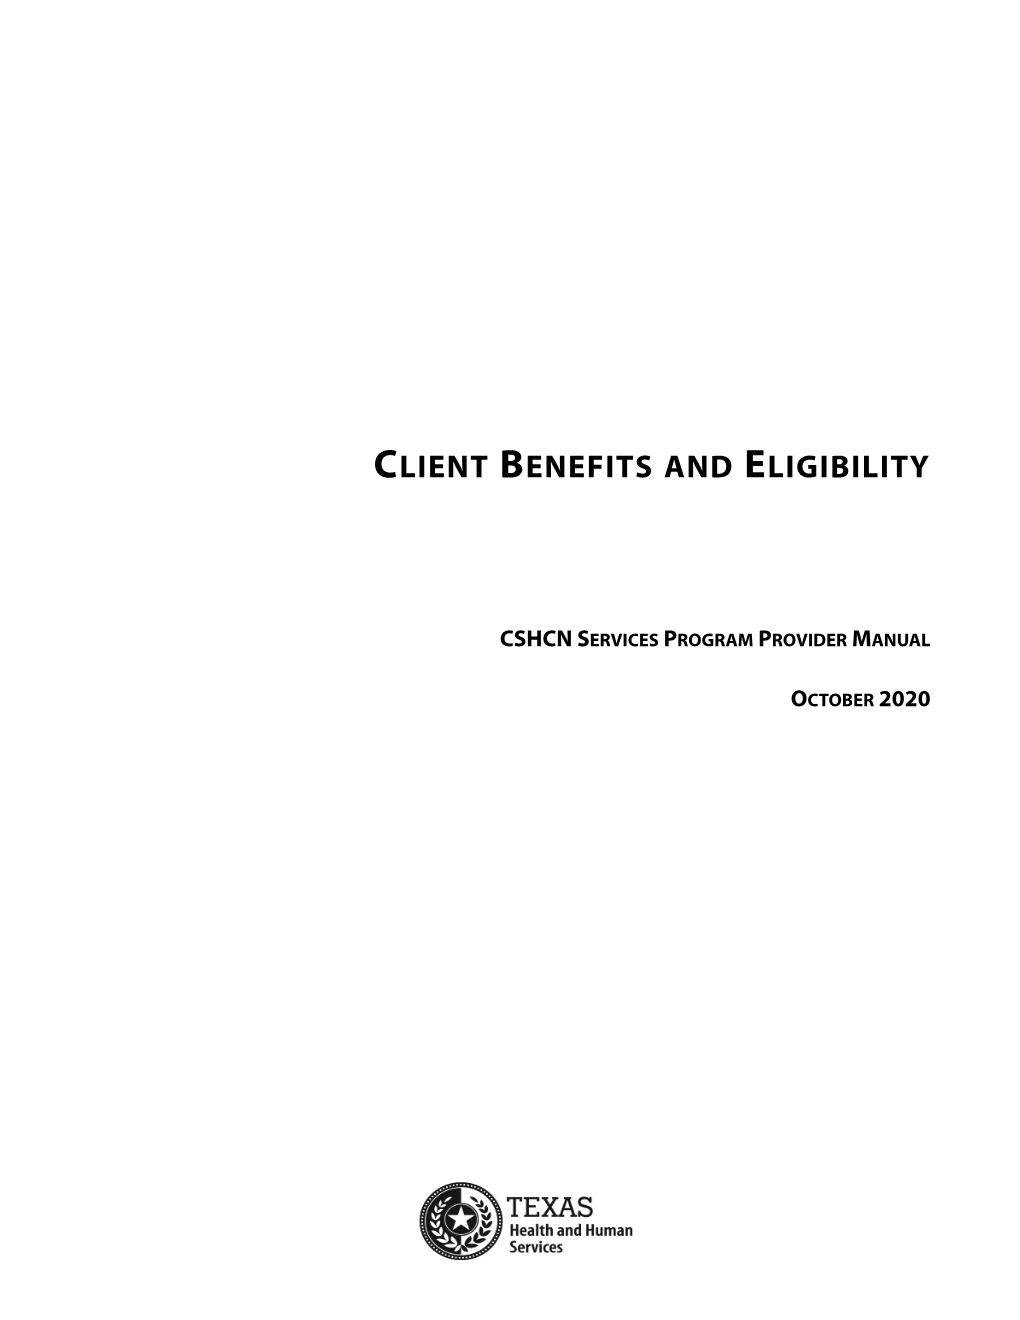 Client Benefits and Eligibility